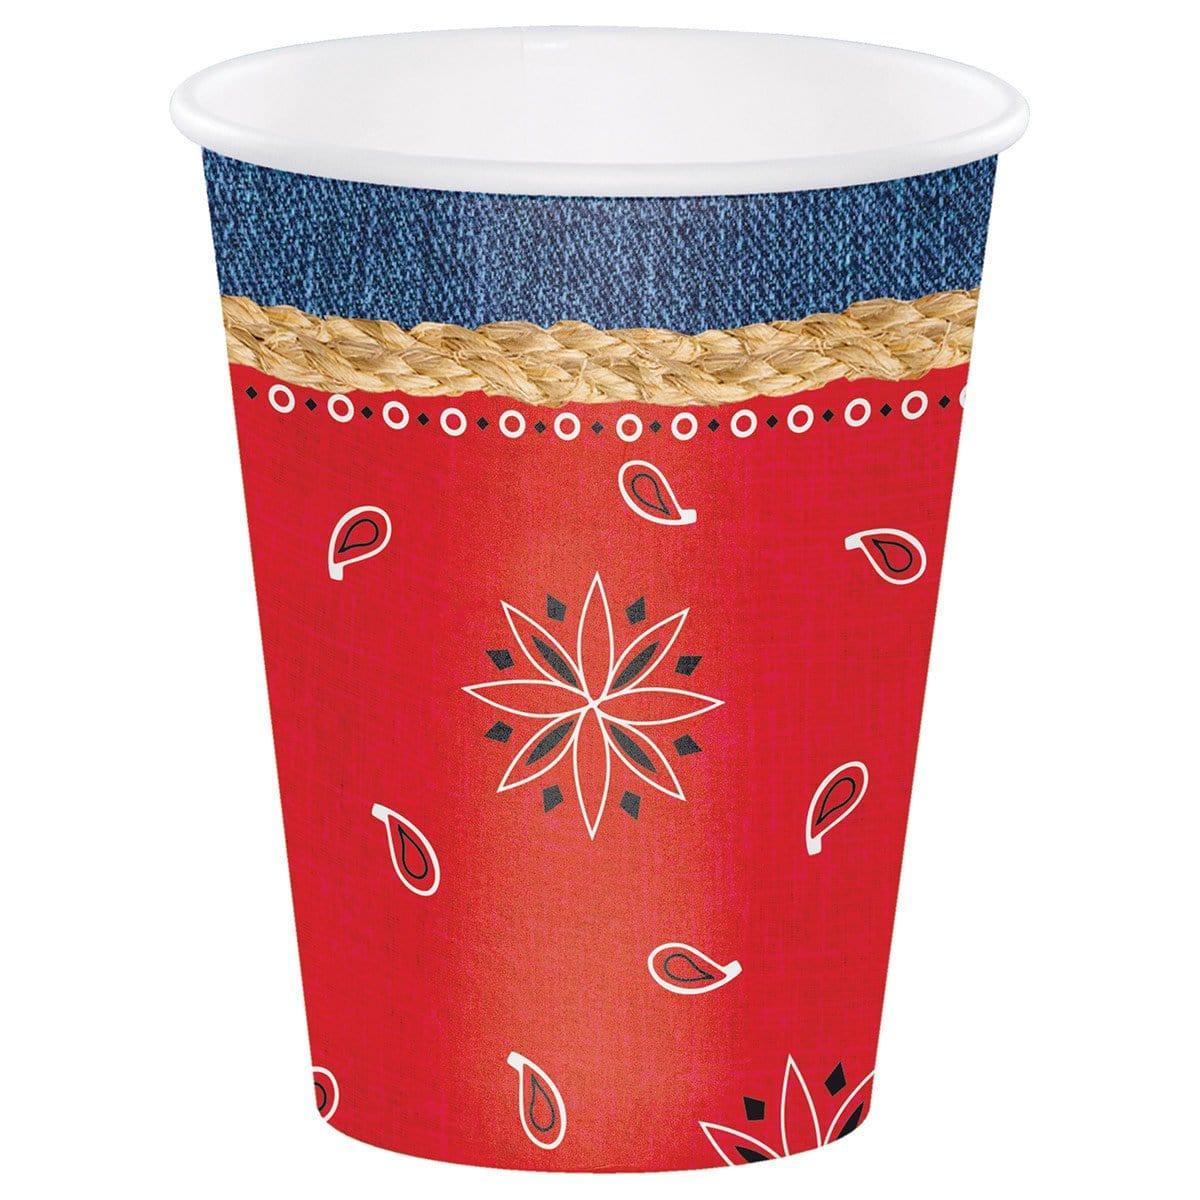 Buy Theme Party Bandanarama Paper Cups 12 Ounces, 8 per Package sold at Party Expert